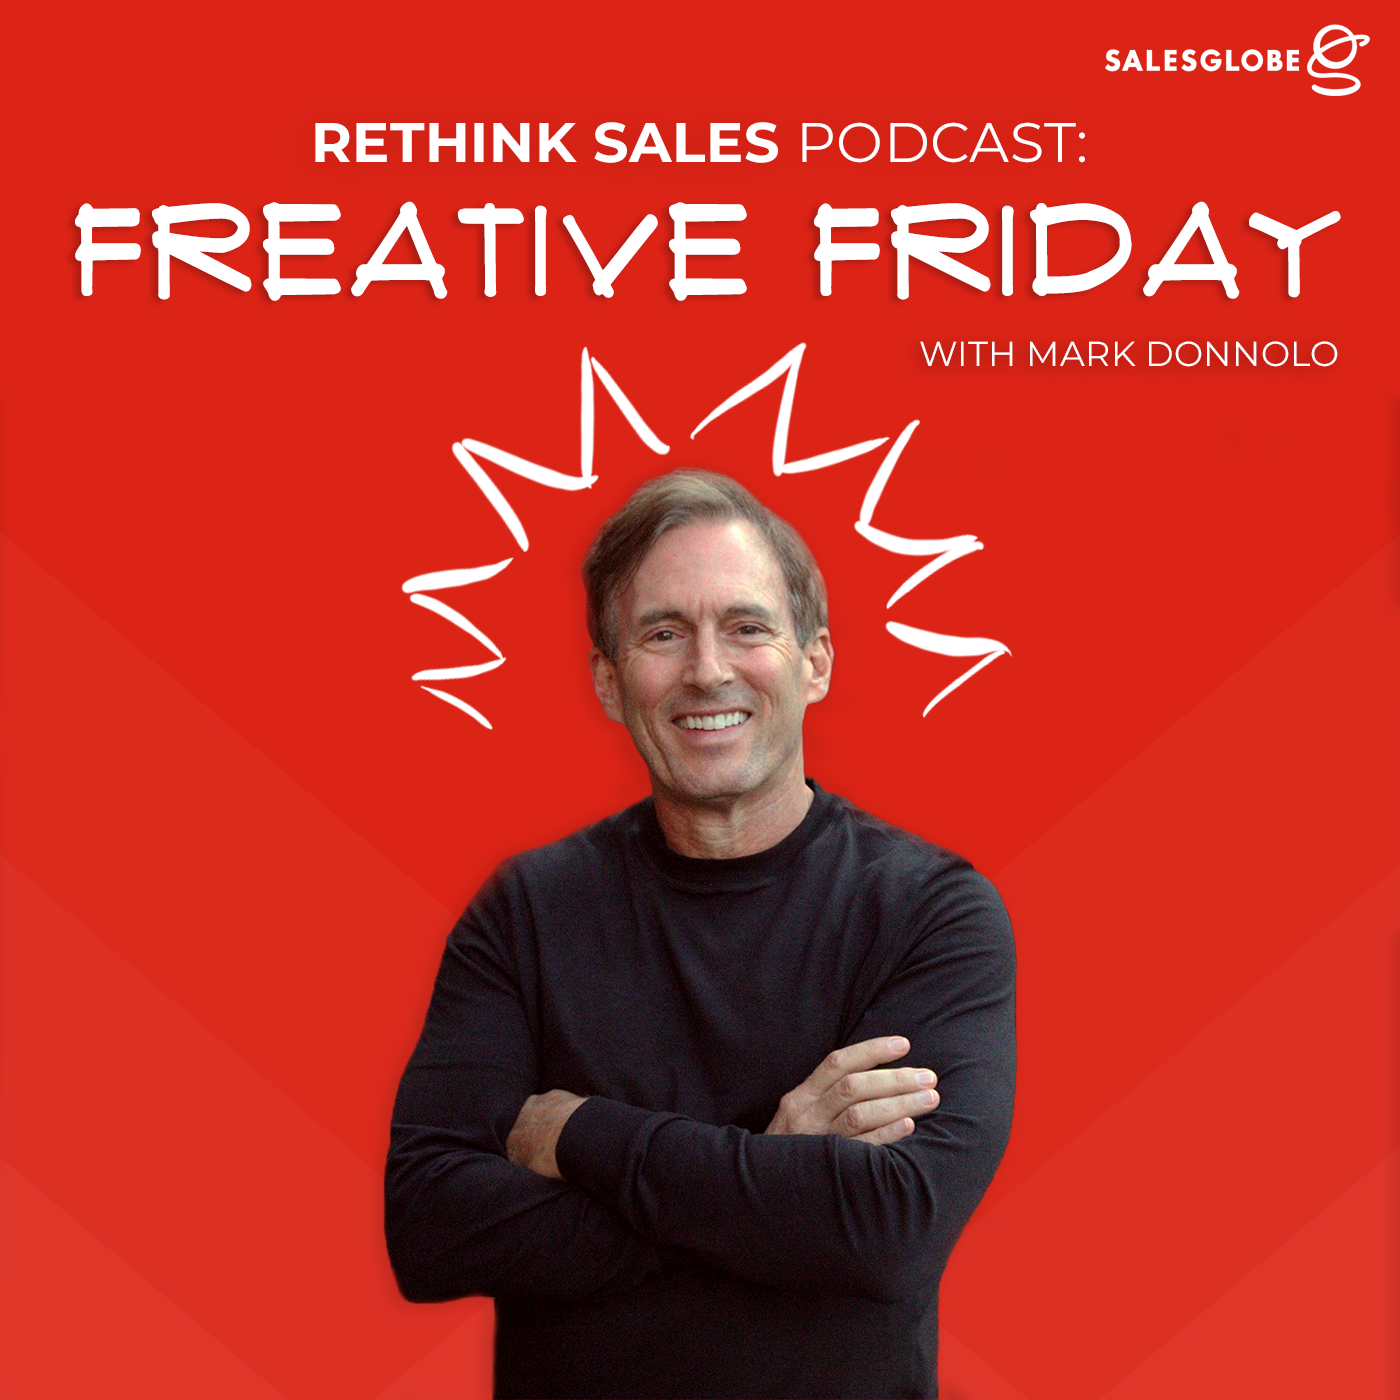 62: Freative Friday - What Drives ROSI?